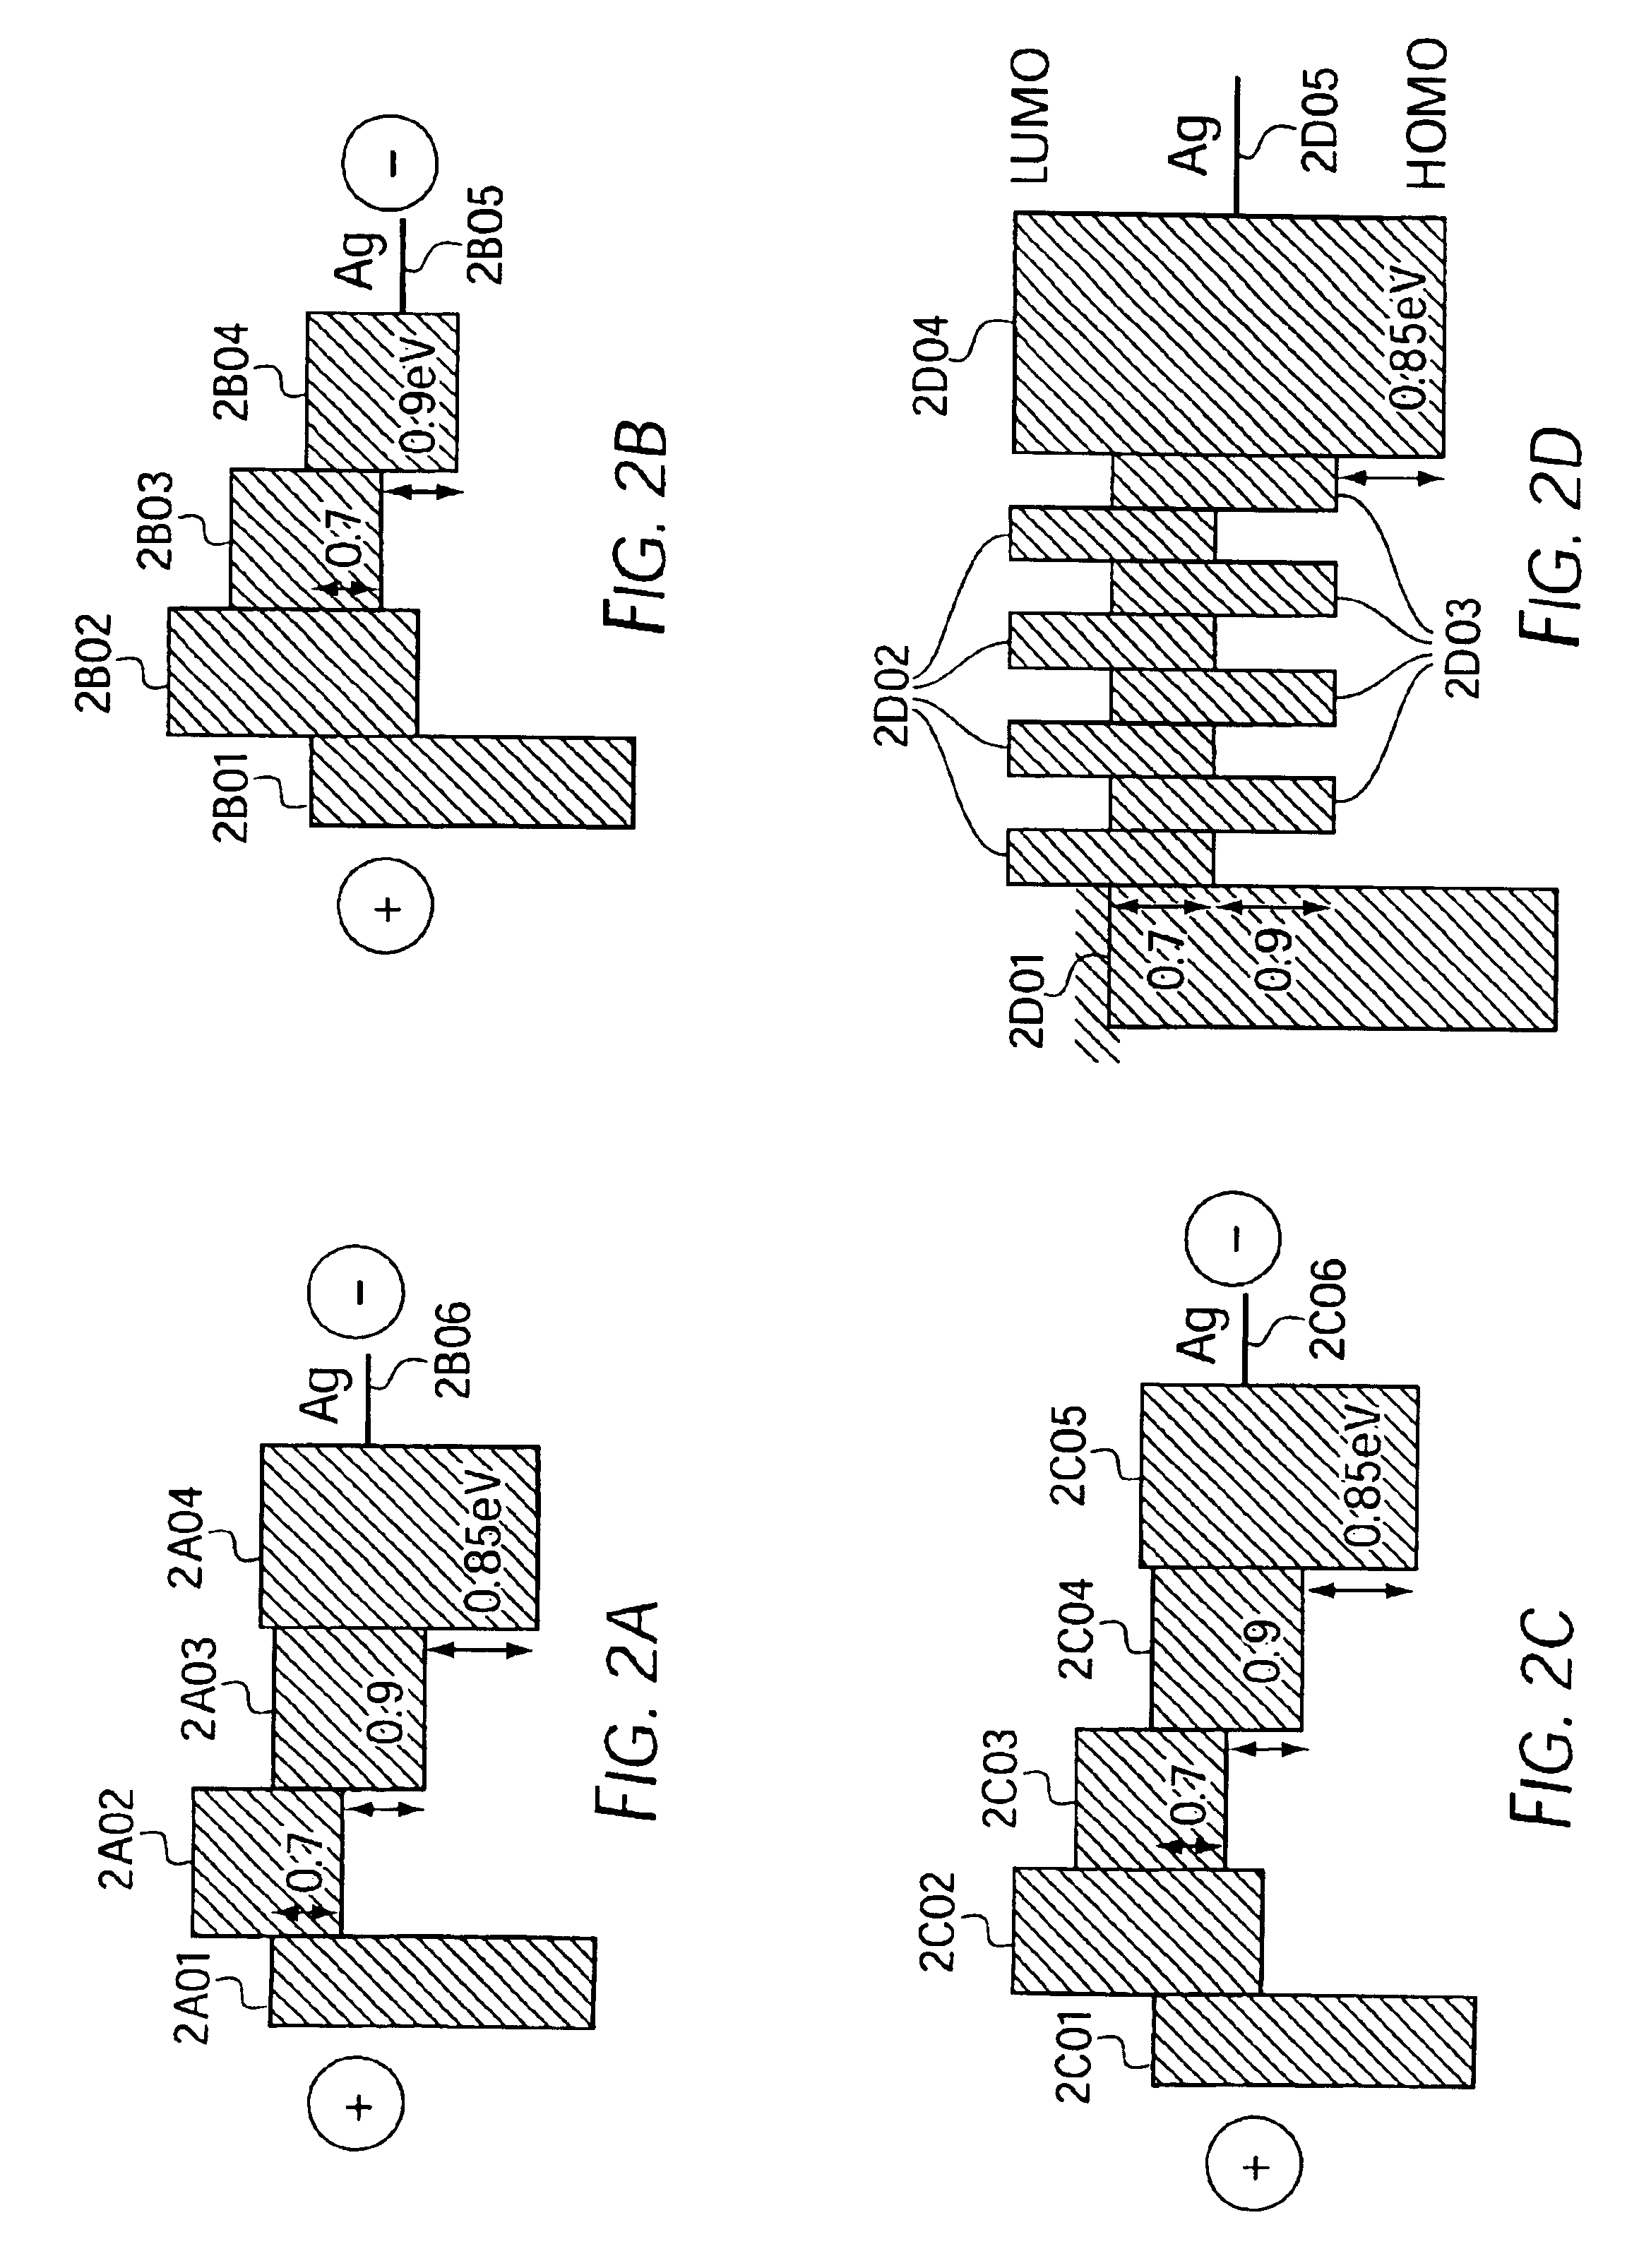 Method of fabricating an organic photosensitive optoelectronic device with an exciton blocking layer